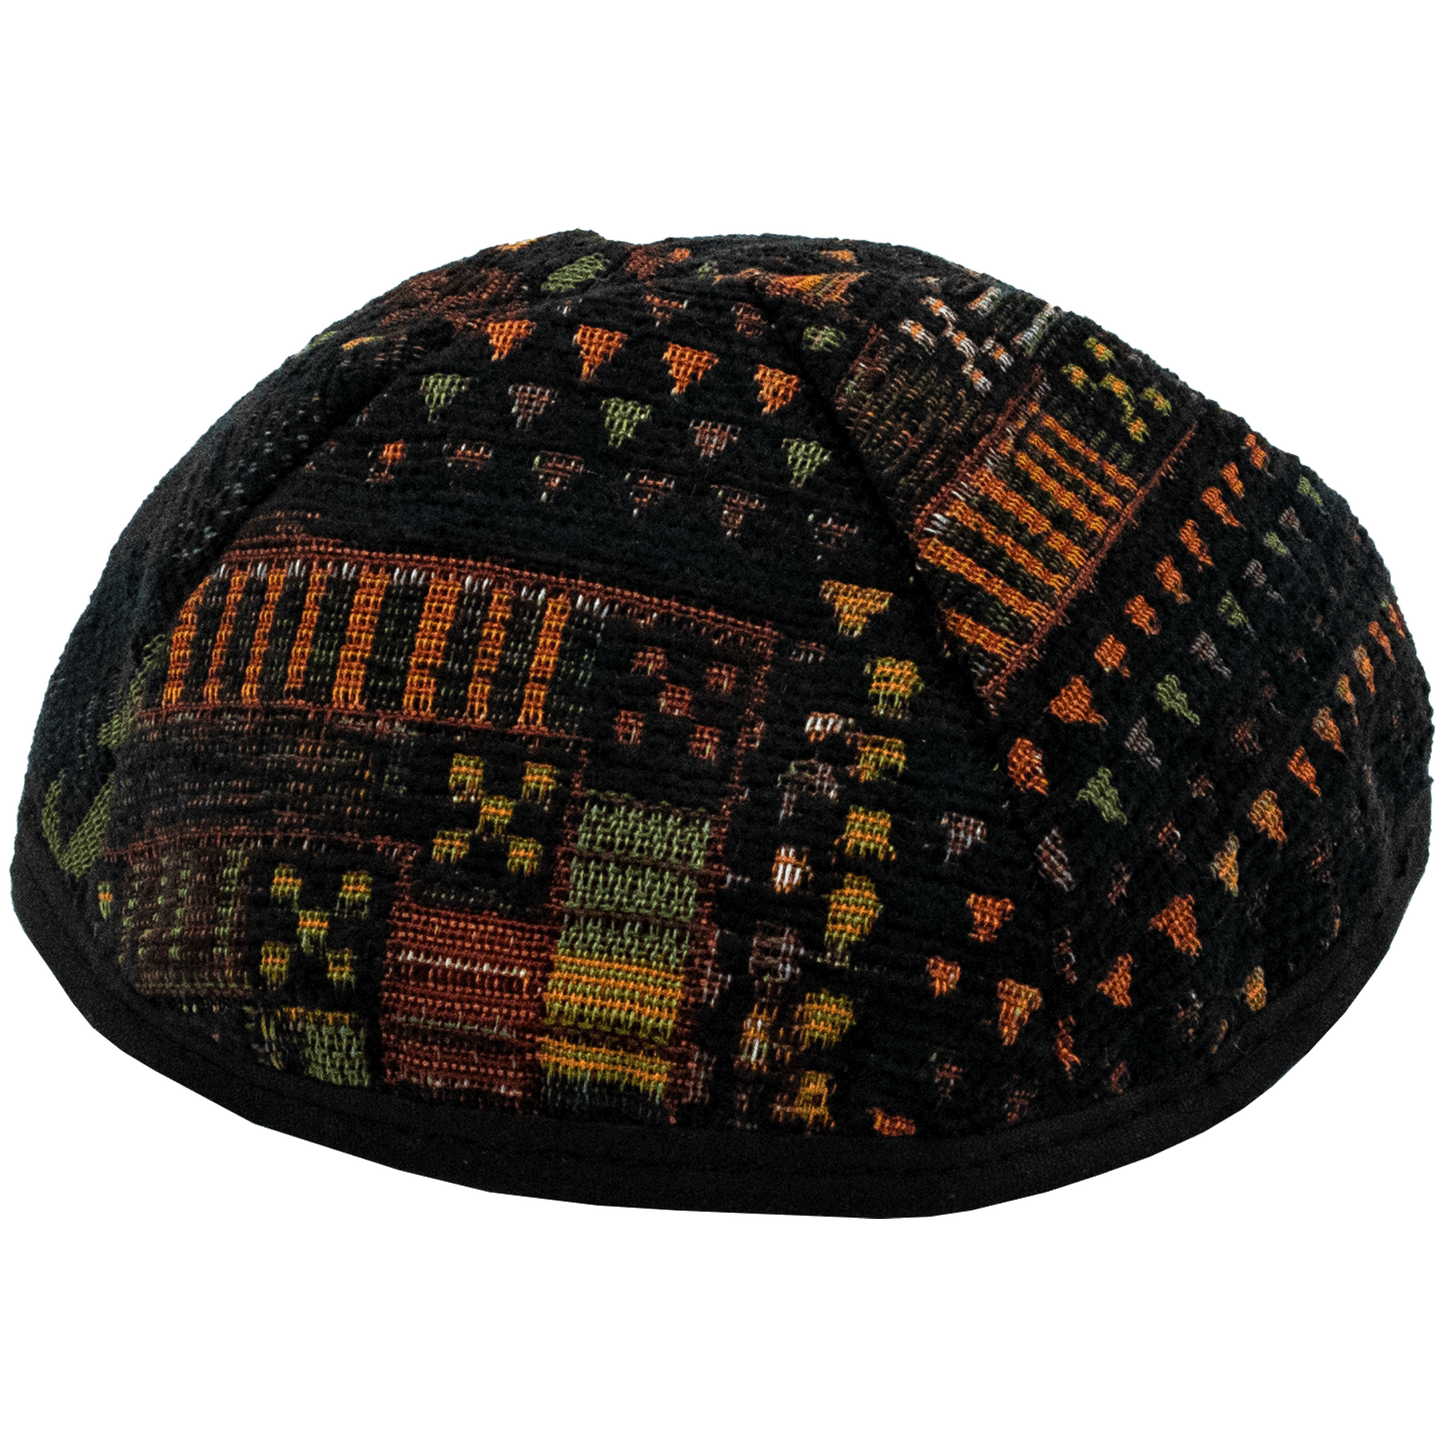 Black Kippah with muted colors